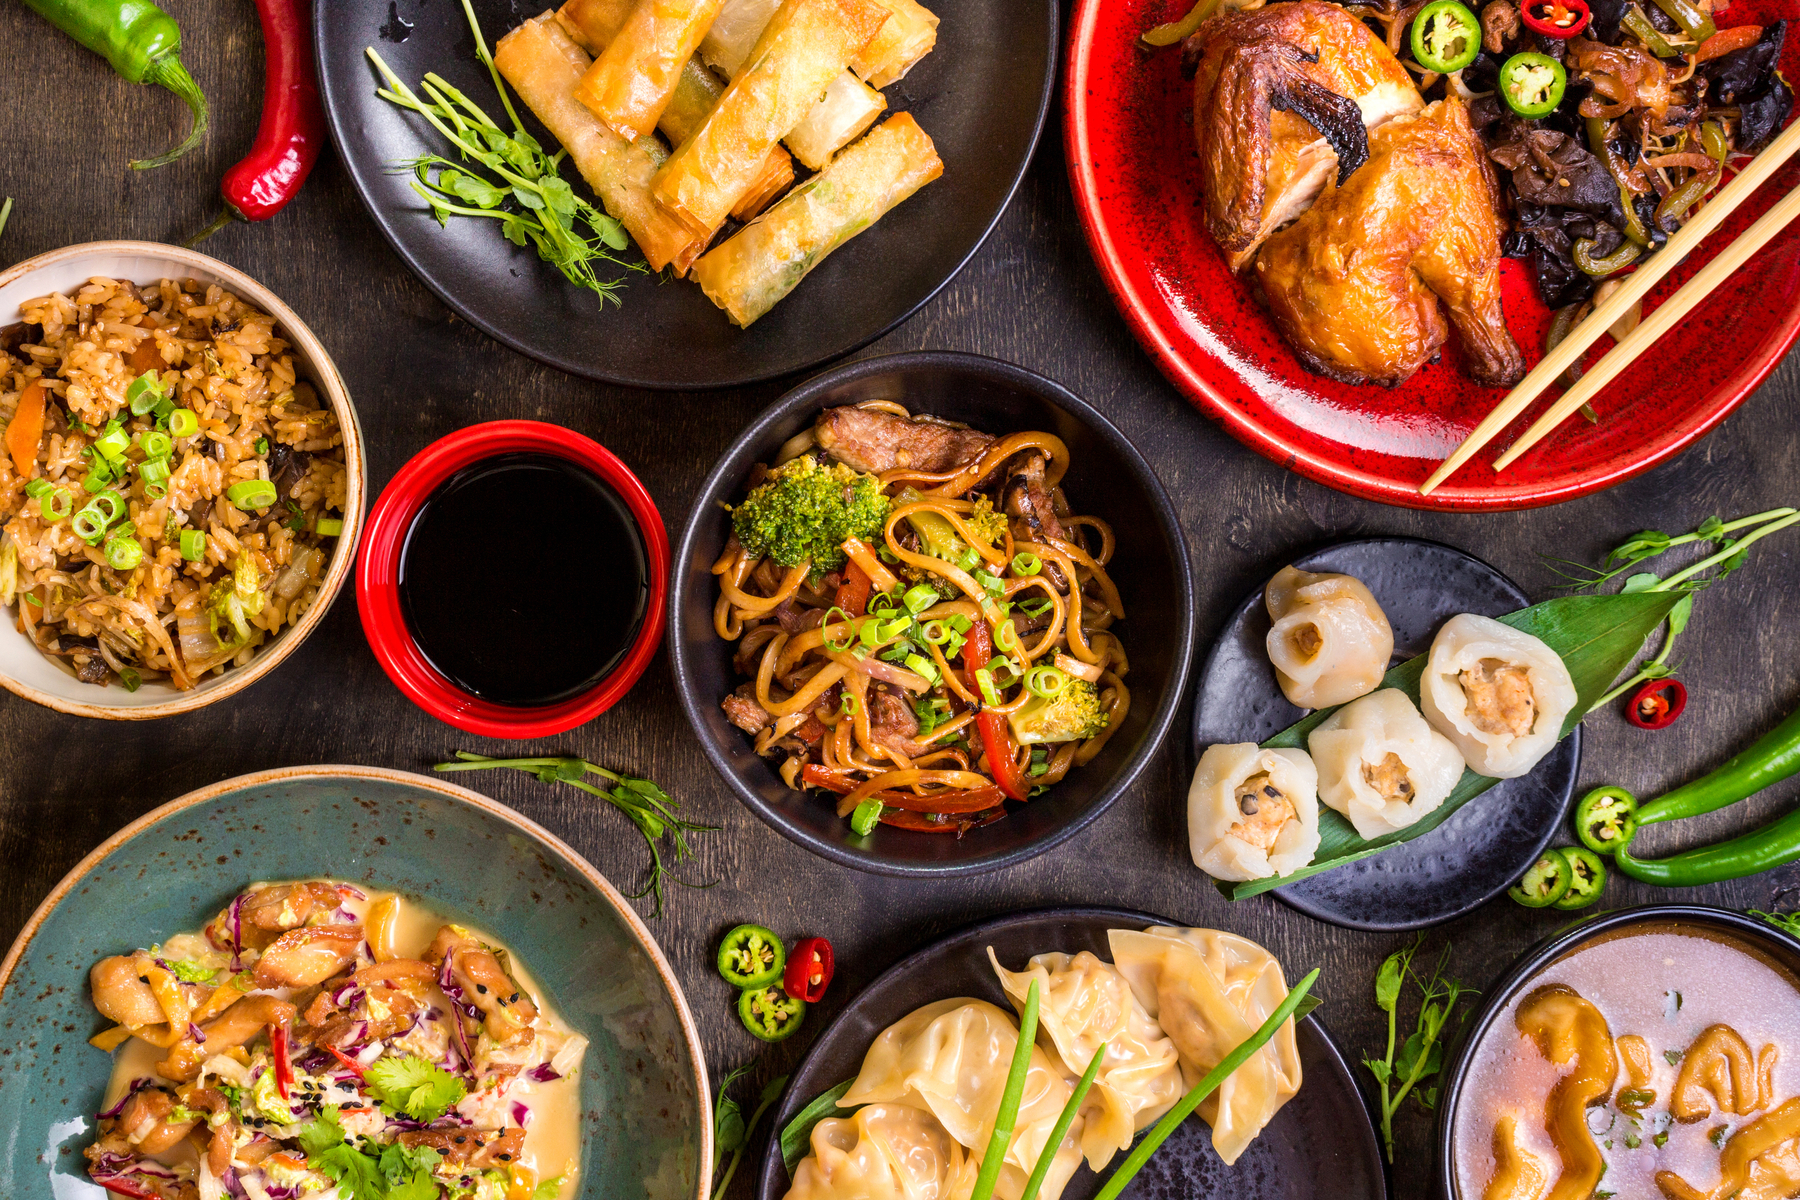 5 traditional dishes to try at home for Chinese New Year